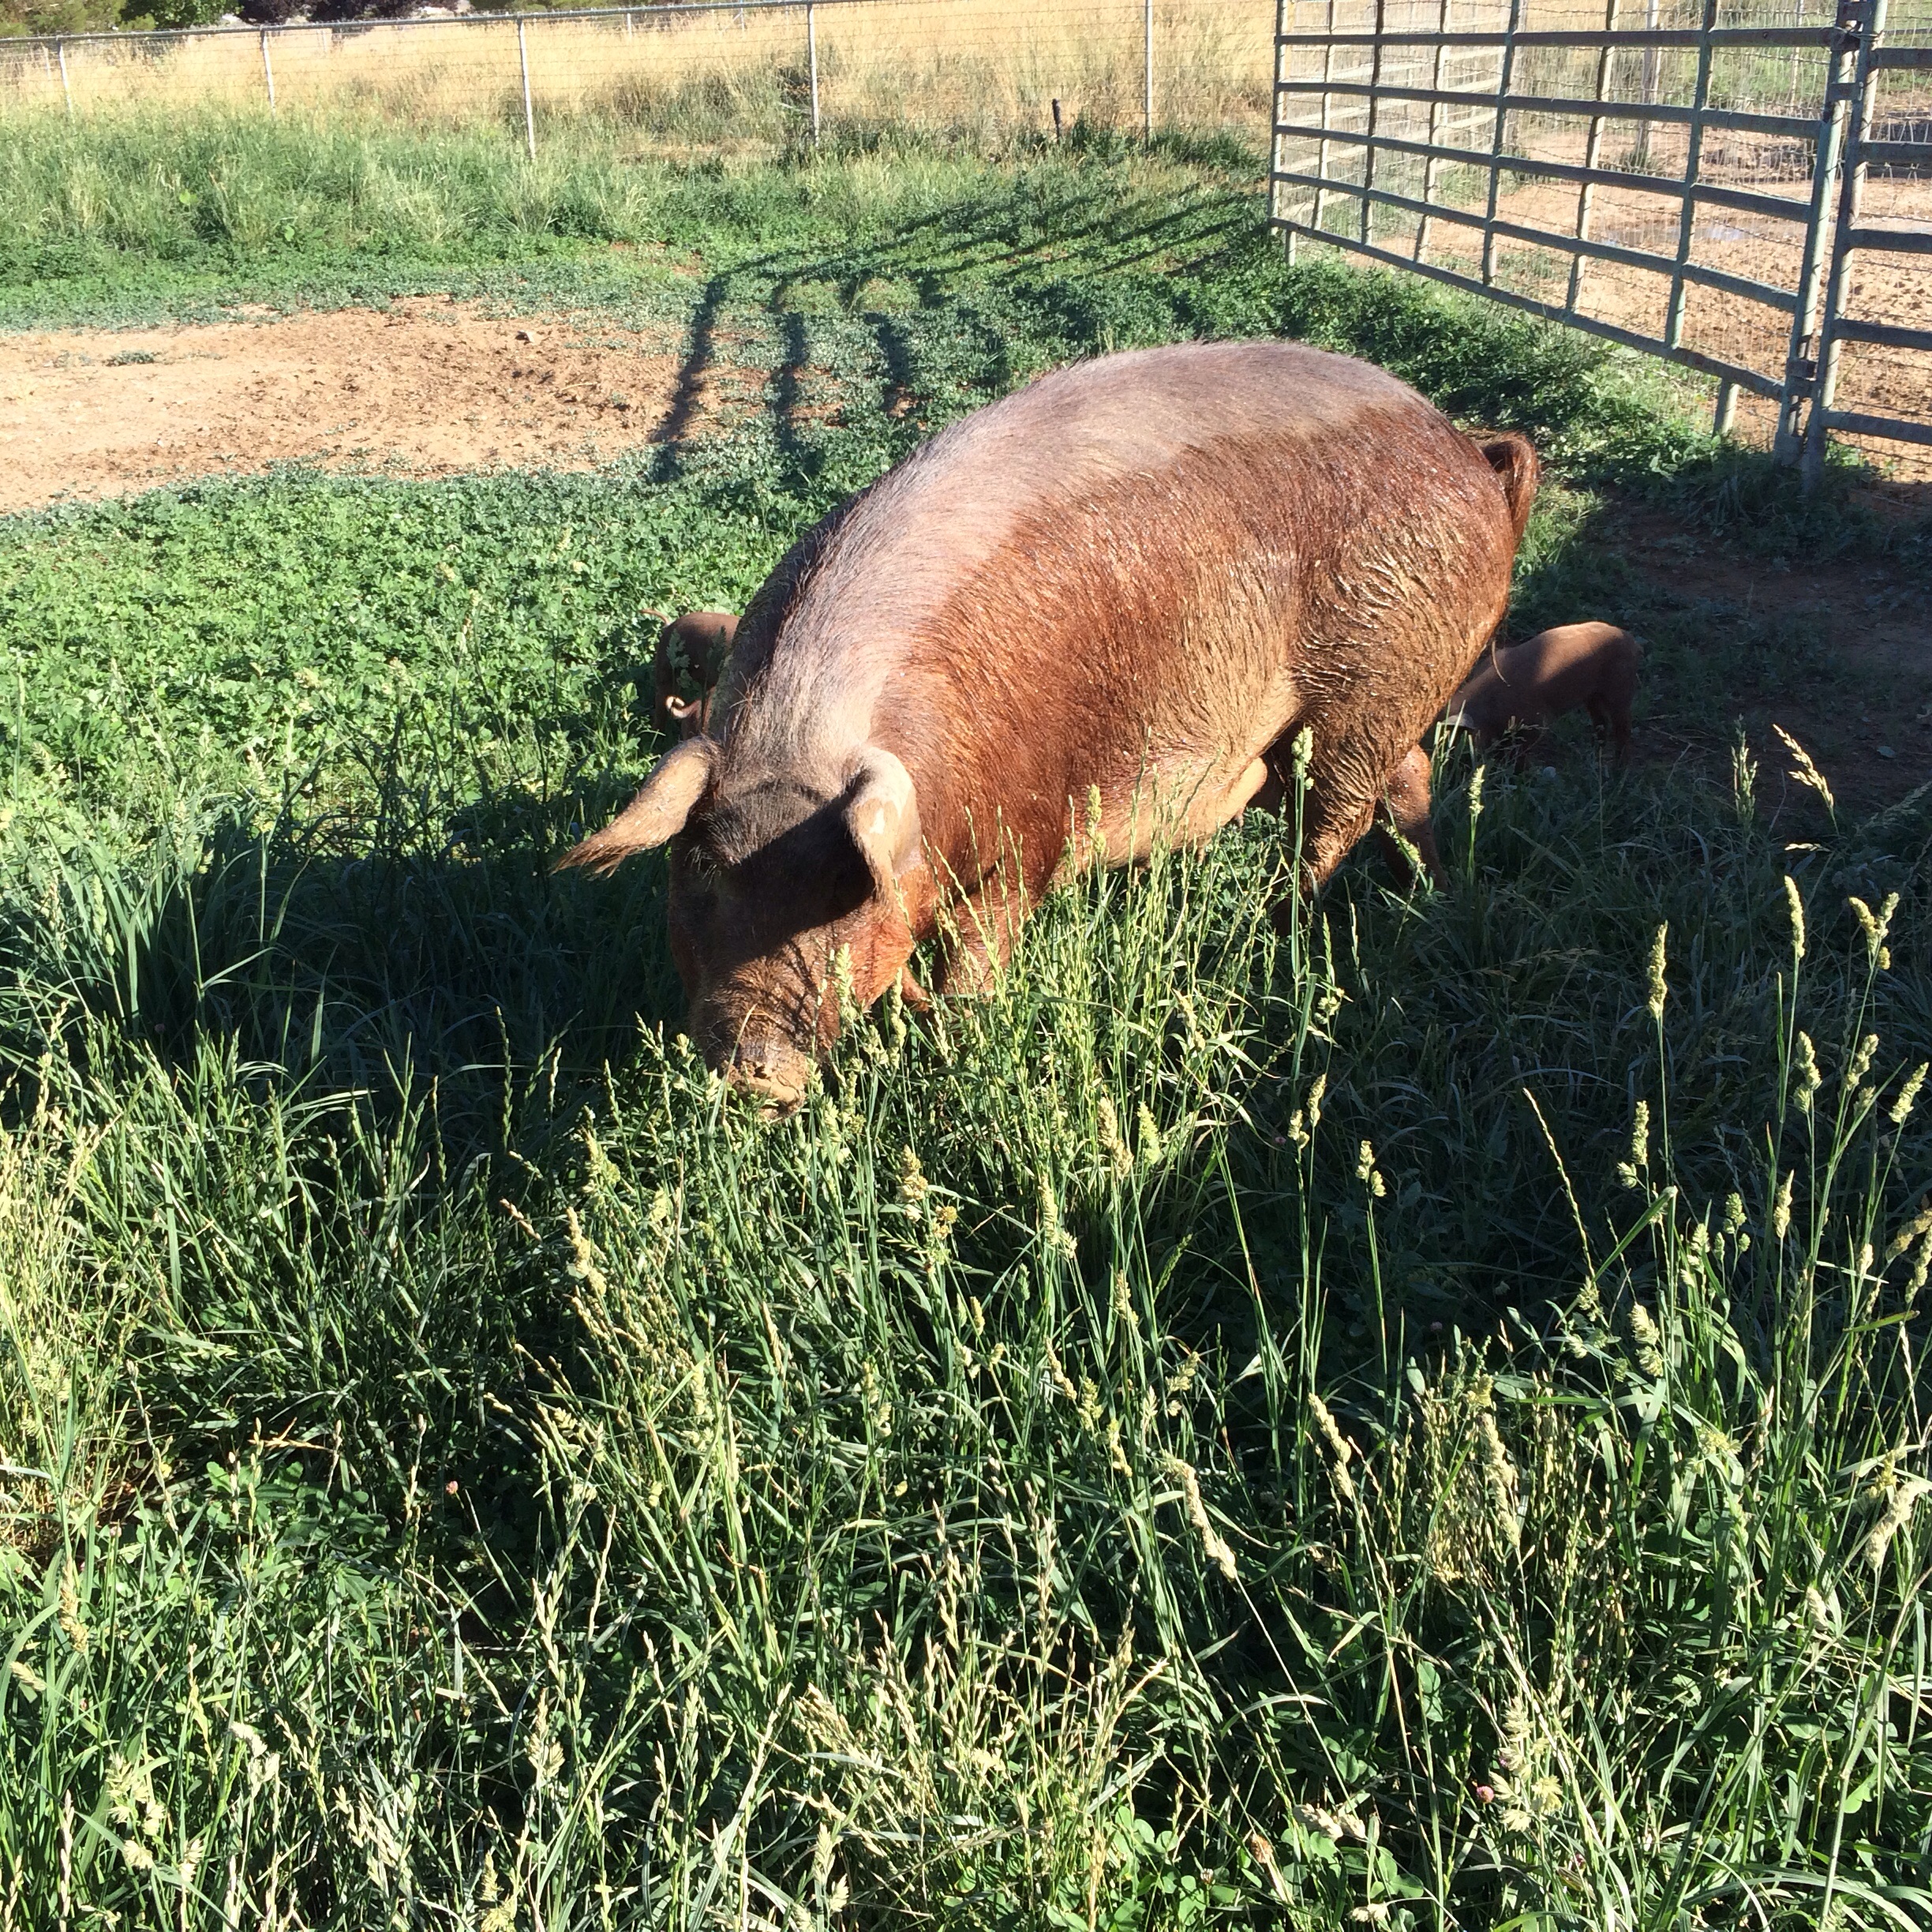 Rosy and her piglets are doing well they run and play all around